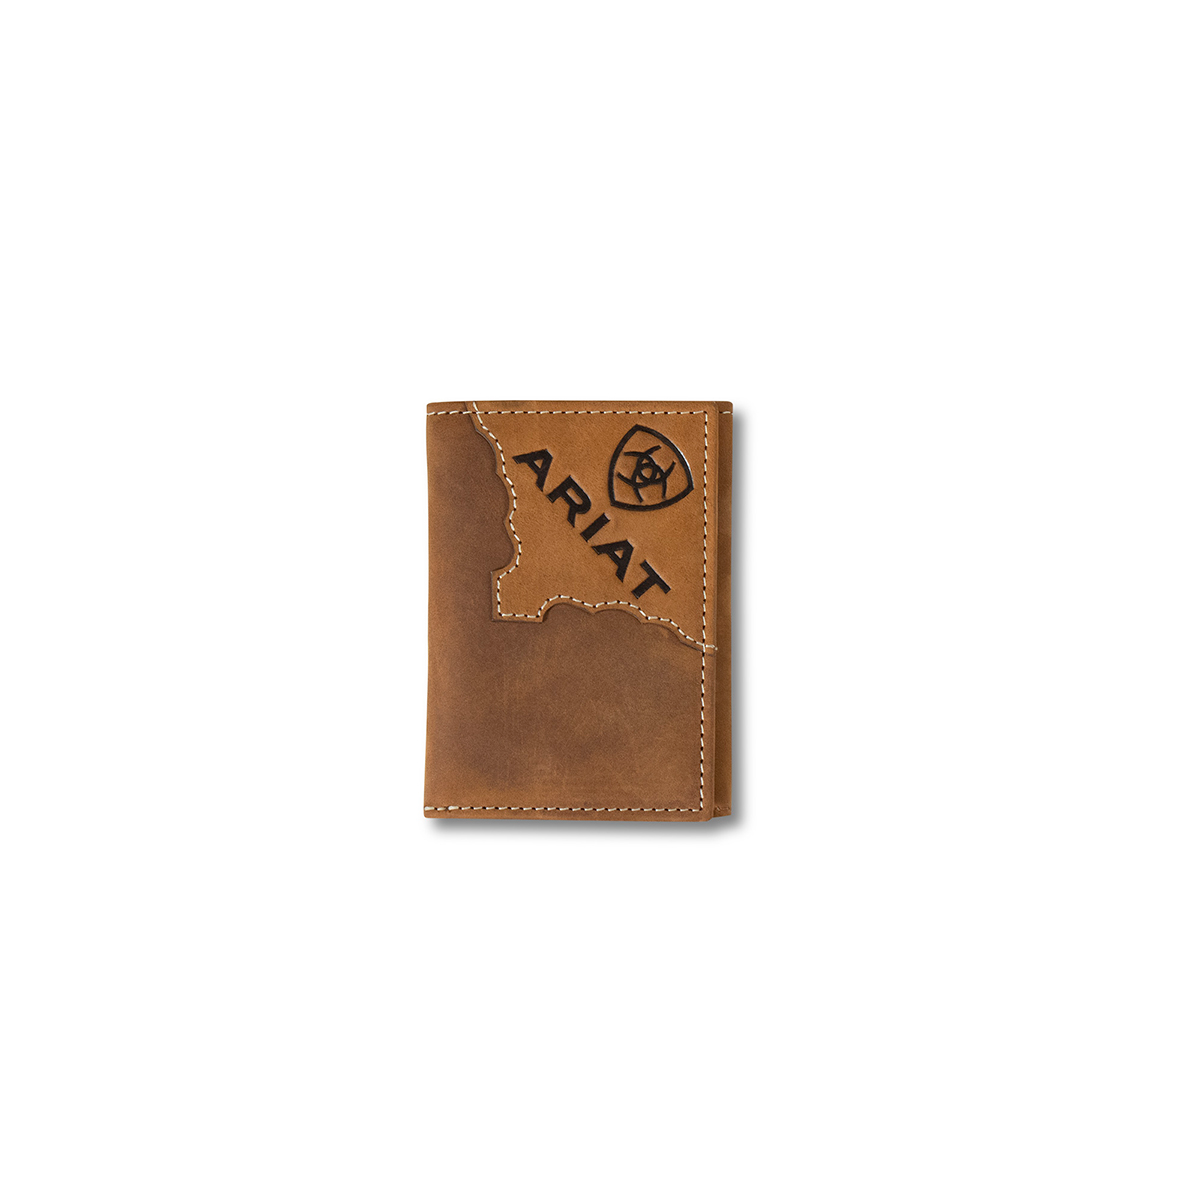 Ariat 2-Tone Leather Trifold Wallet - Medium Brown